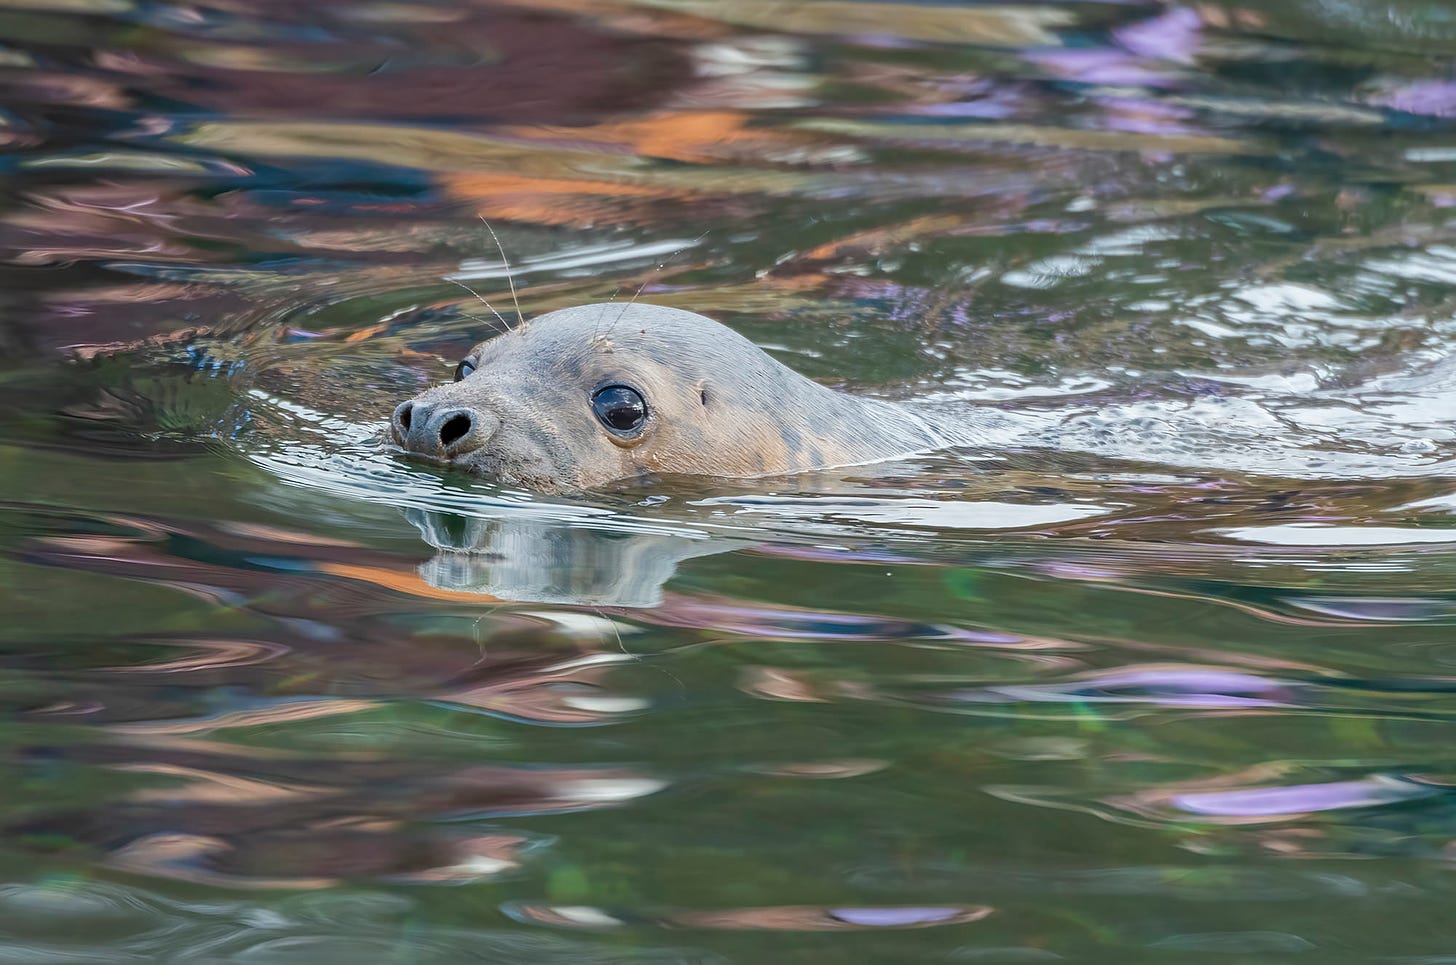 Photo of a grey seal with its head above the surface of the water